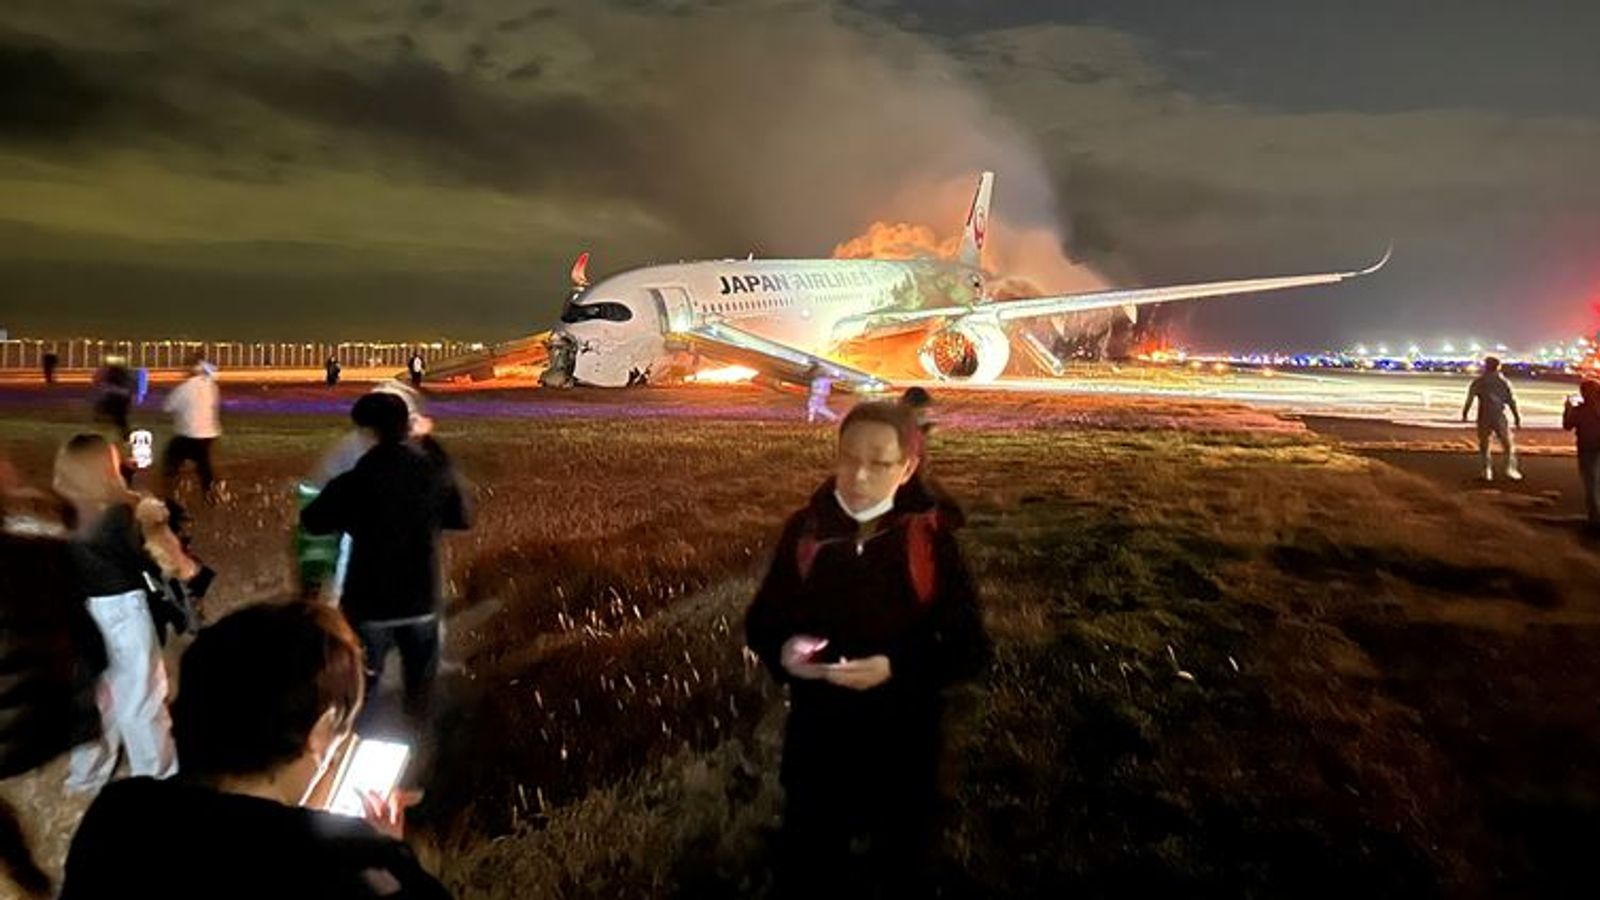 Japan plane fire: Family 'still in shock' after evacuating burning aircraft